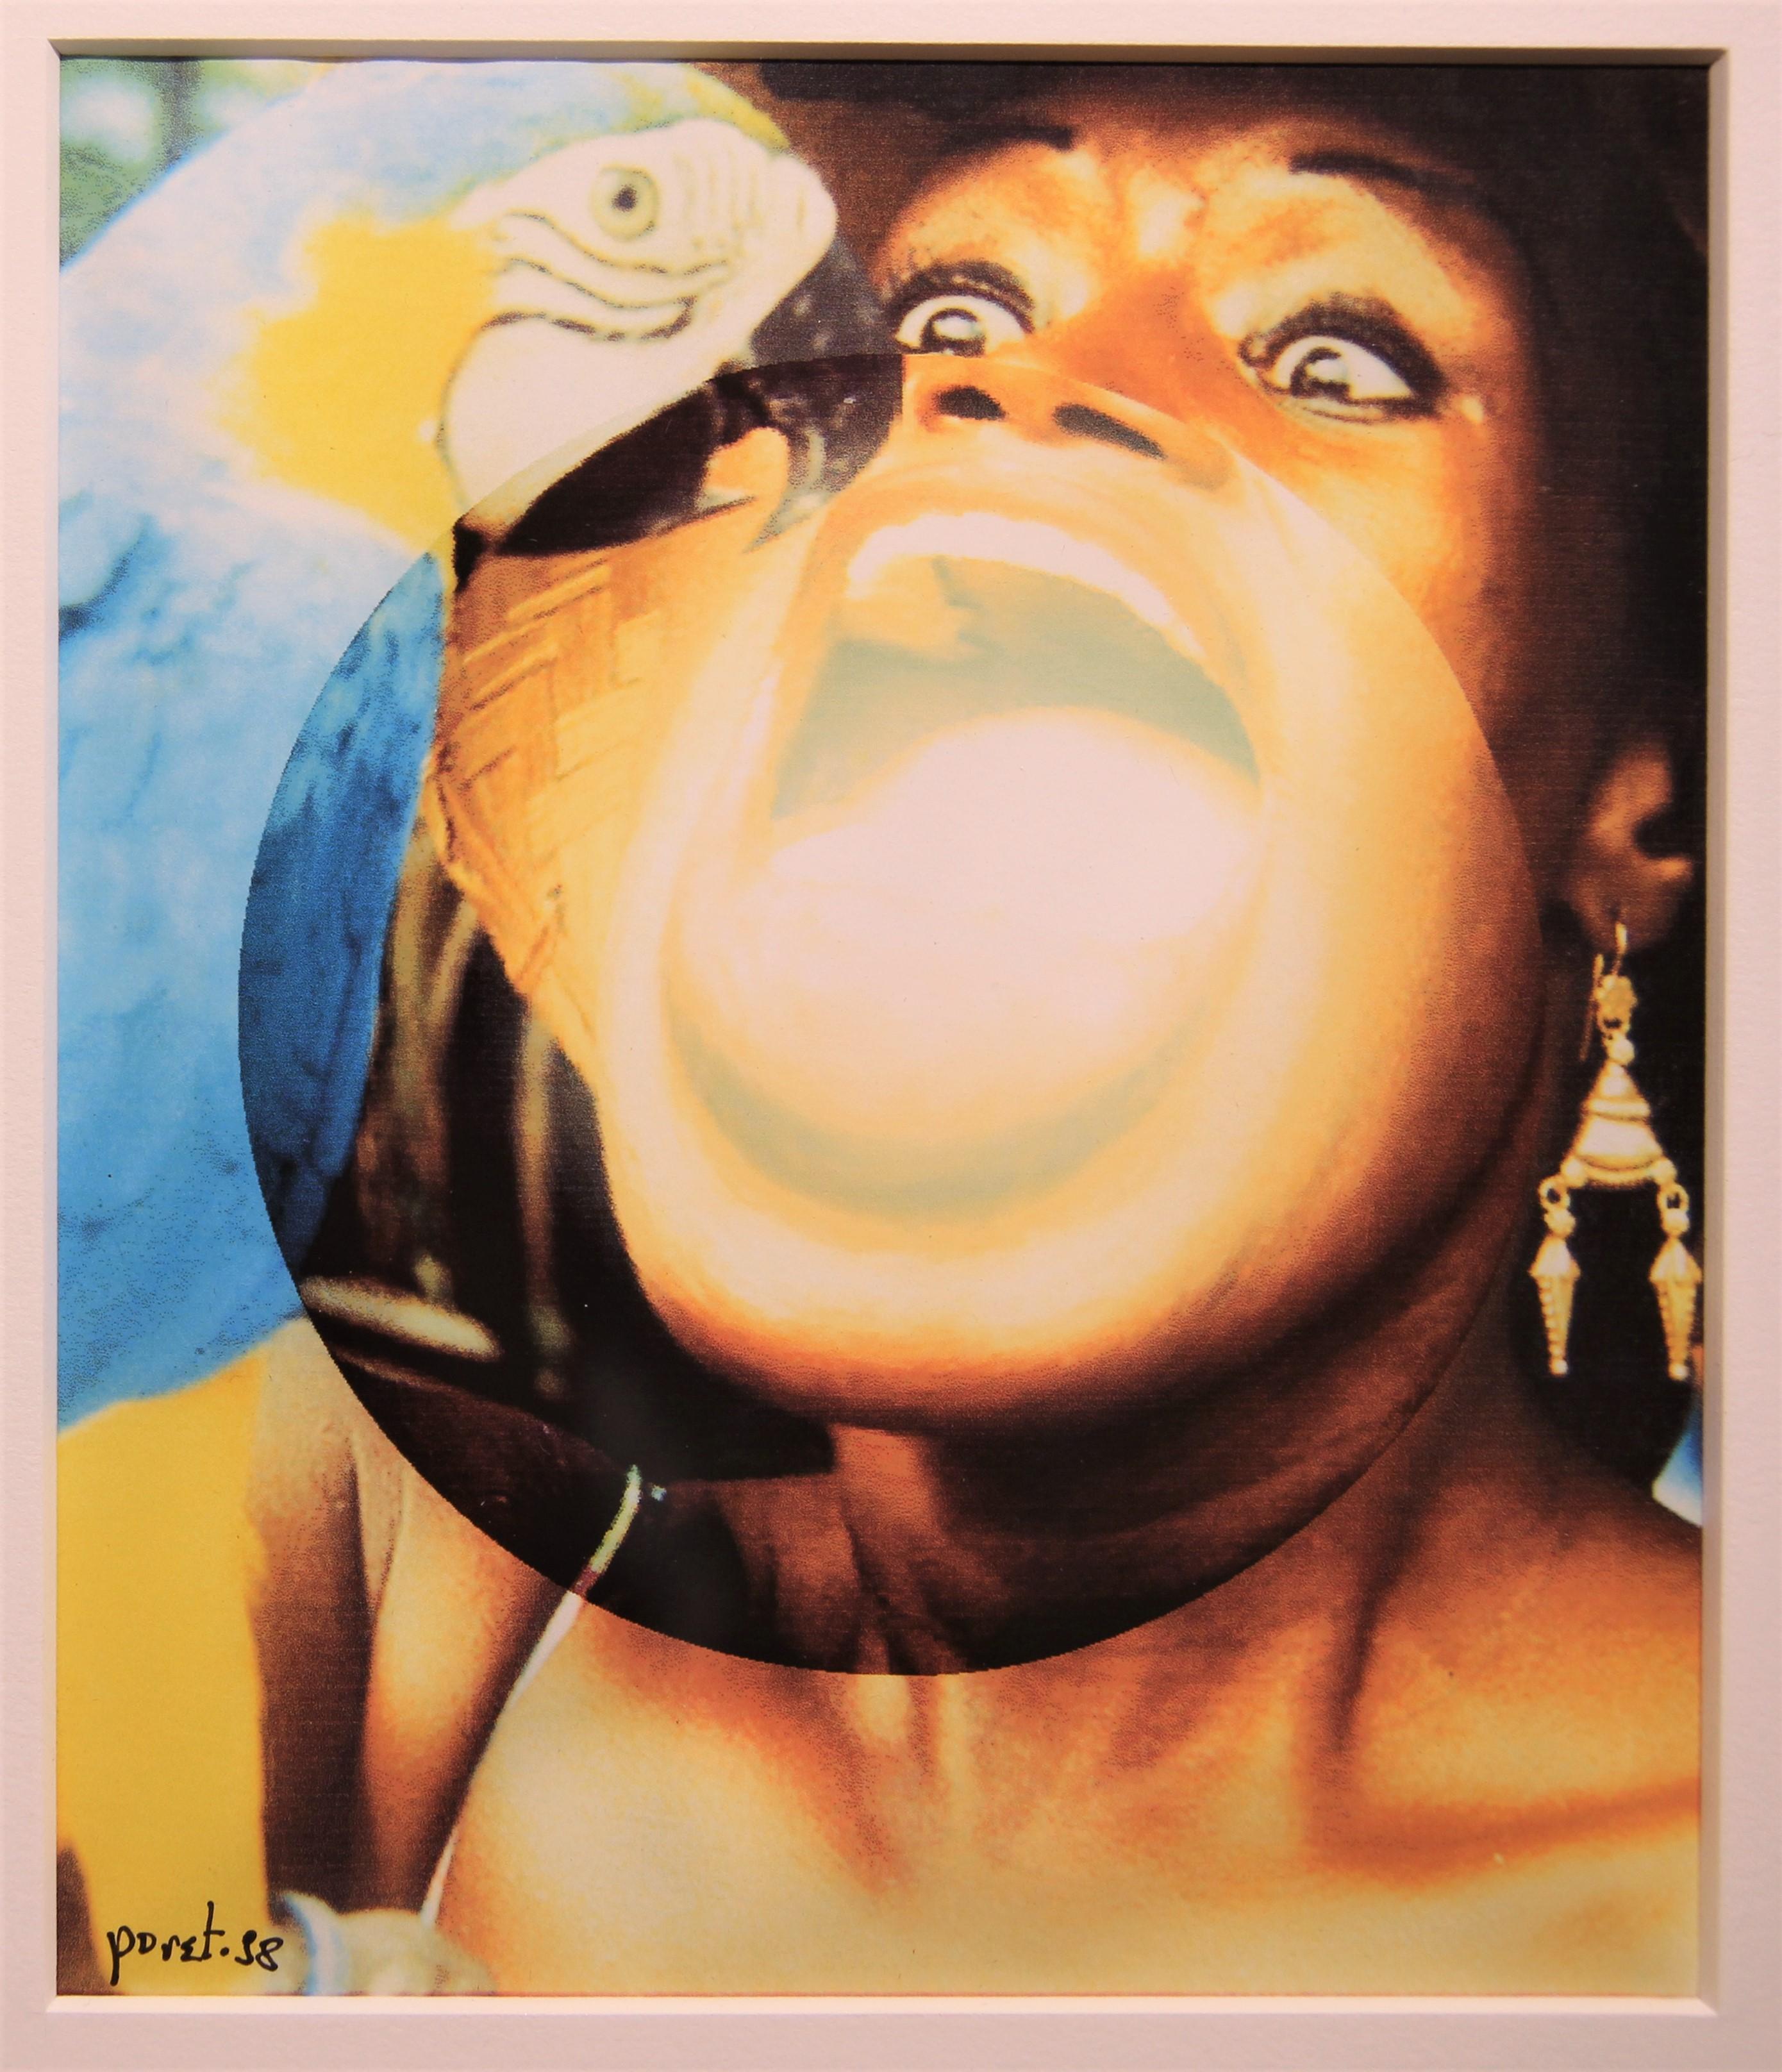 “Grace Jones 1” Blue, Yellow, and White Manipulated Photograph Portraits on Grid - Modern Print by Pierre Poretti